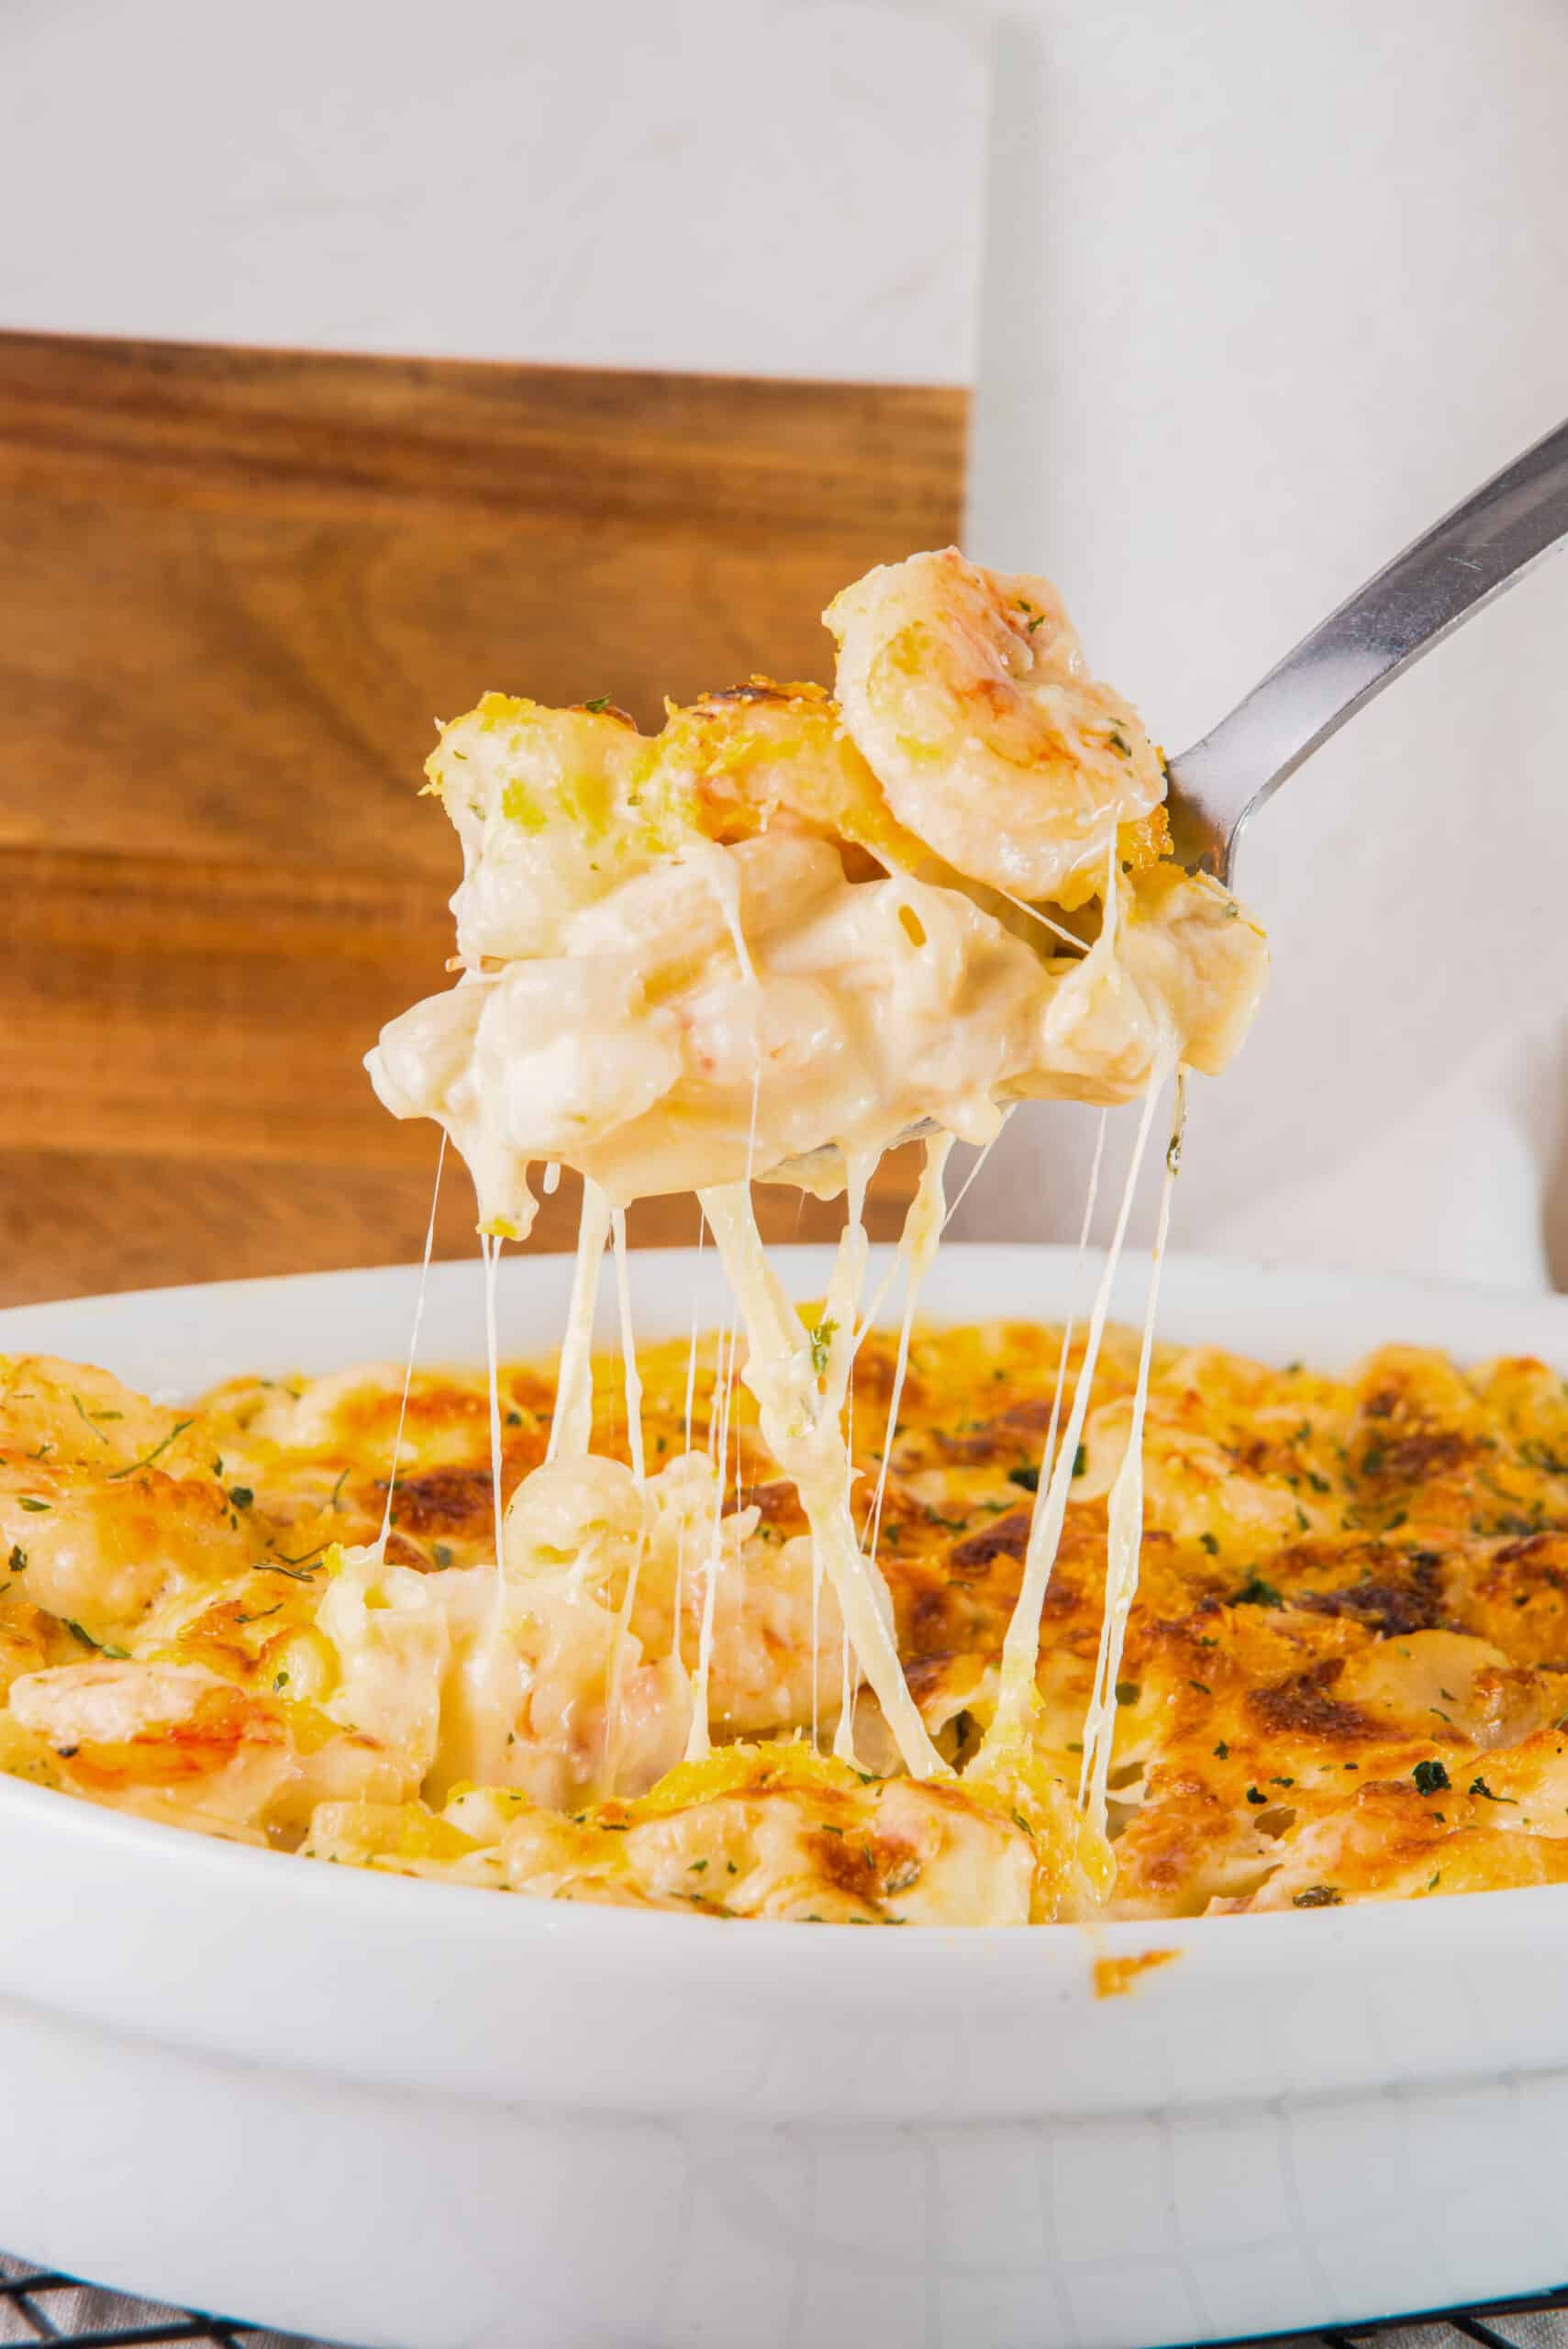 Seafood Mac and Cheese
